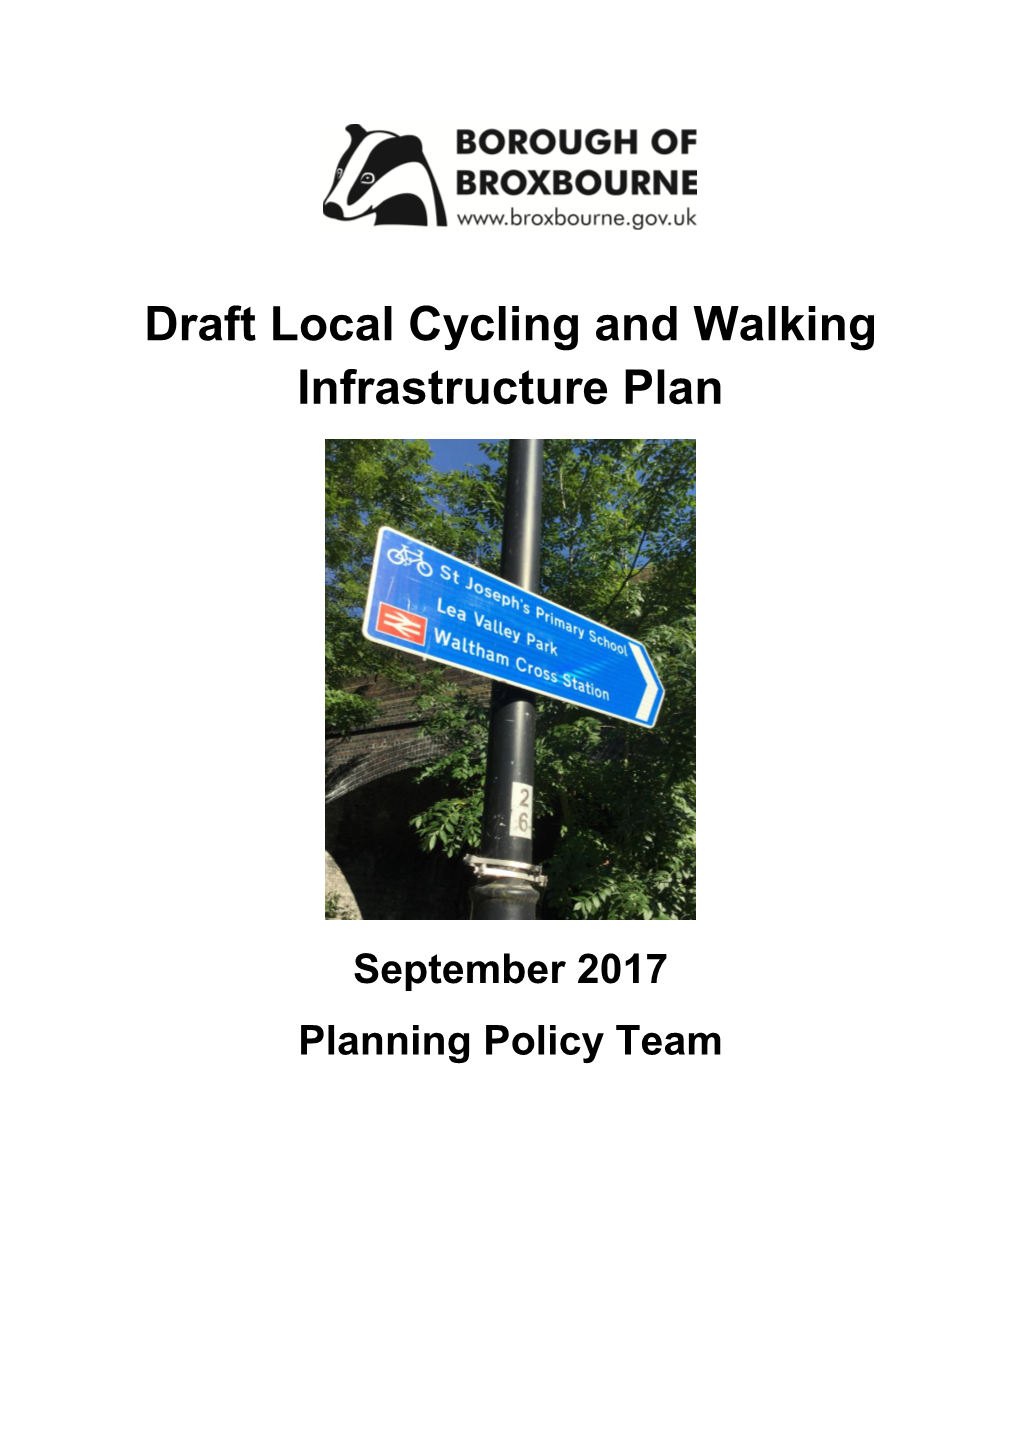 Draft Local Cycling and Walking Infrastructure Plan